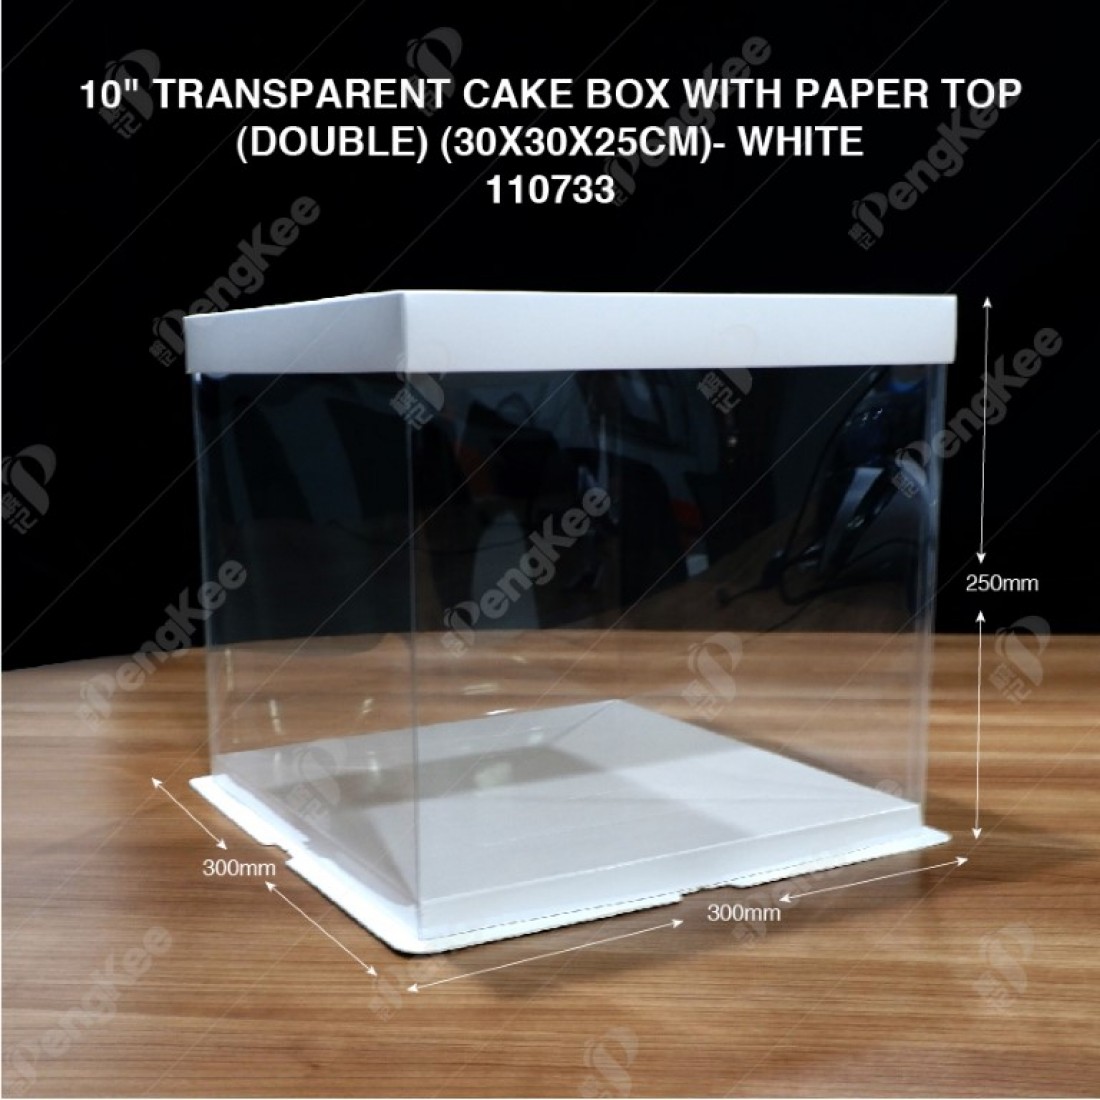 10" TRANSPARENT CAKE BOX WITH PAPER TOP(DOUBLE) (30*30*25CM)- WHITE